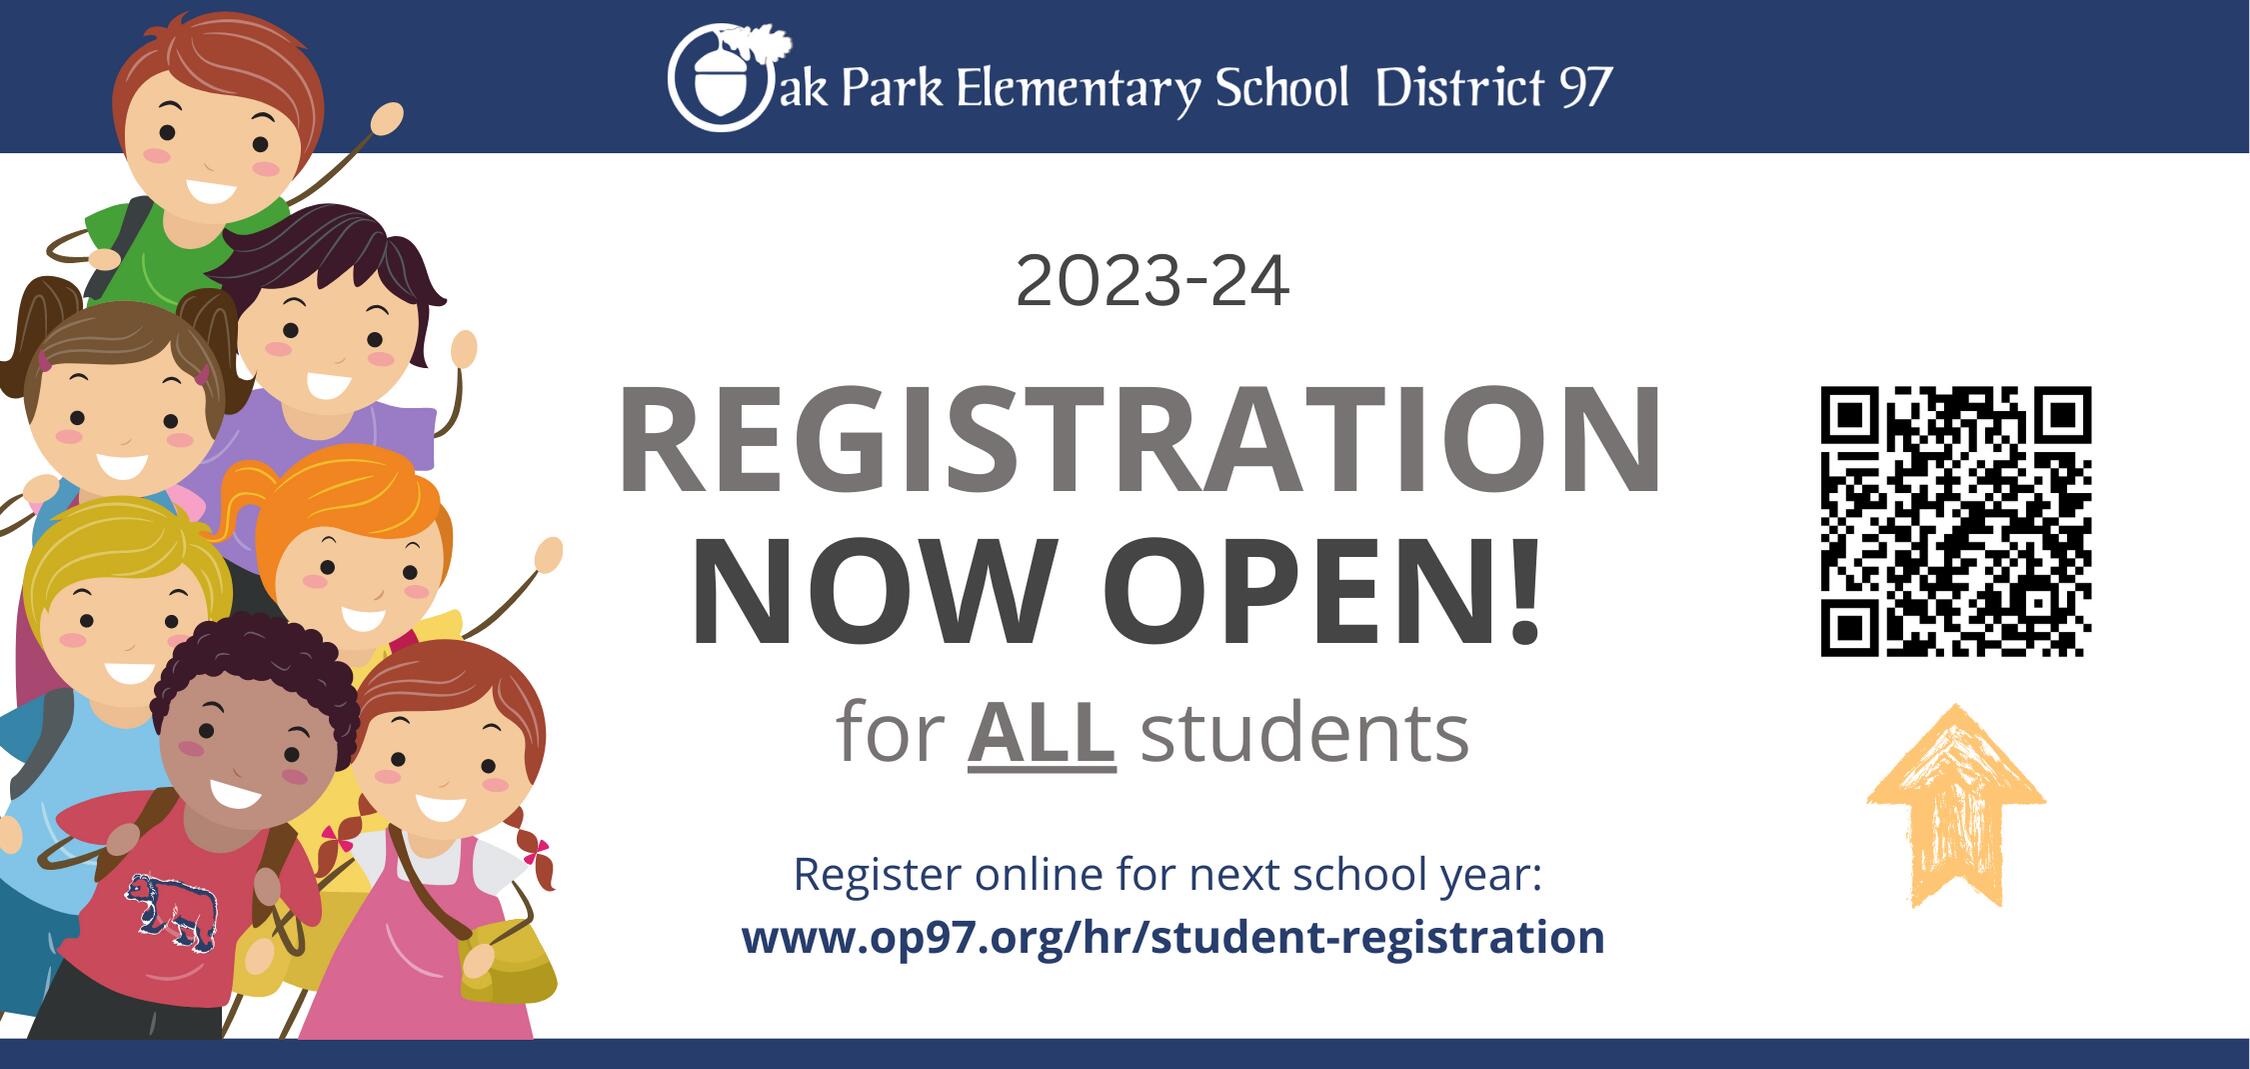 Registration Now Open for All Students!